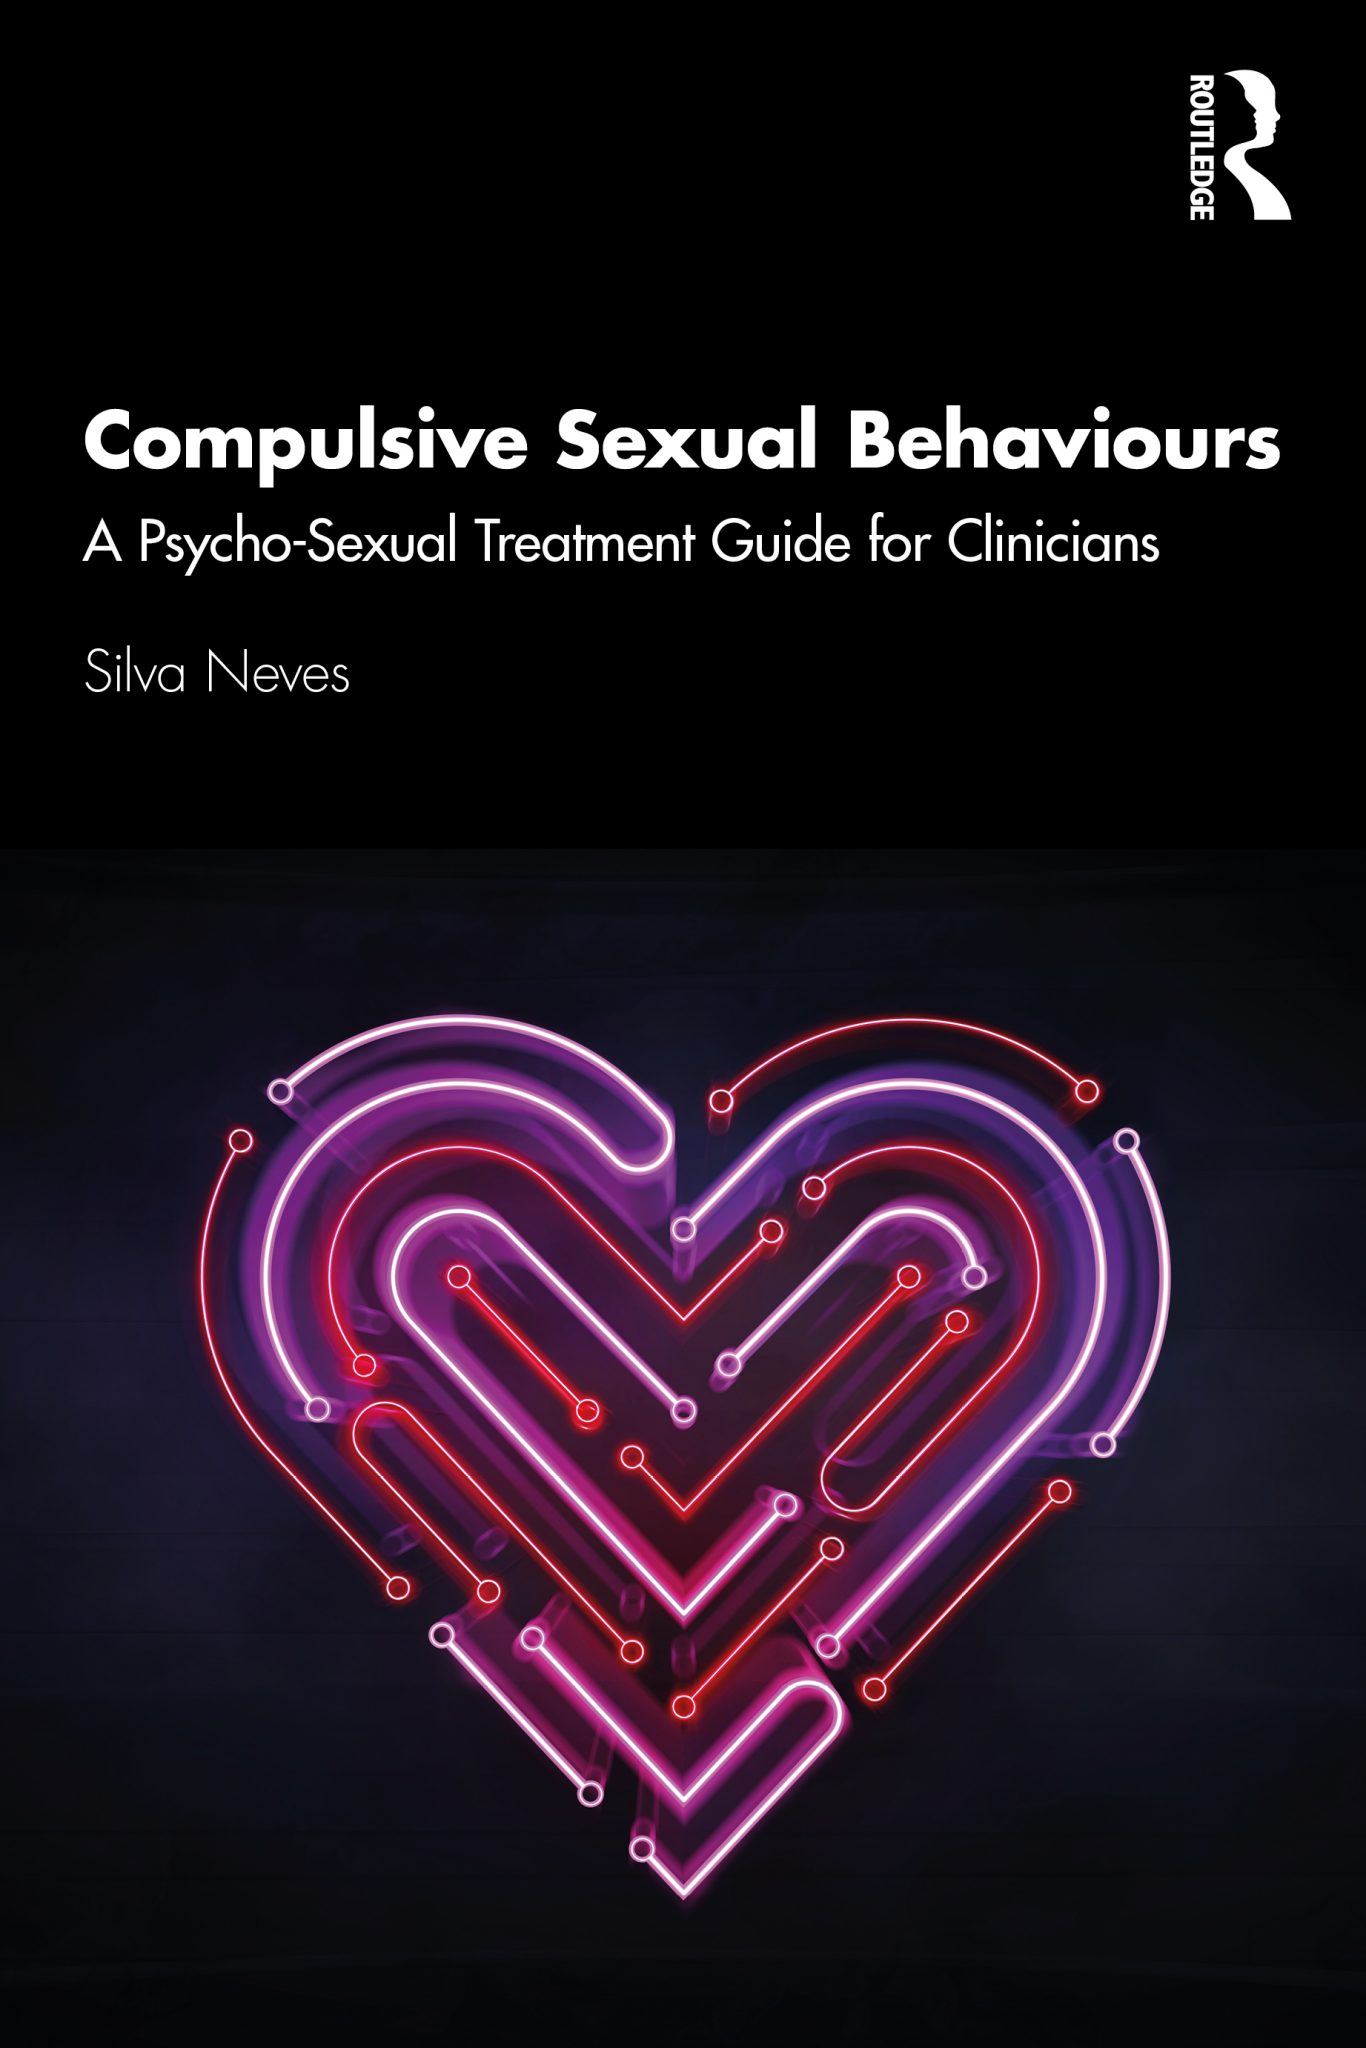 A Psychosexual Treatment Guide For Compulsive Sexual Behaviours Lcc